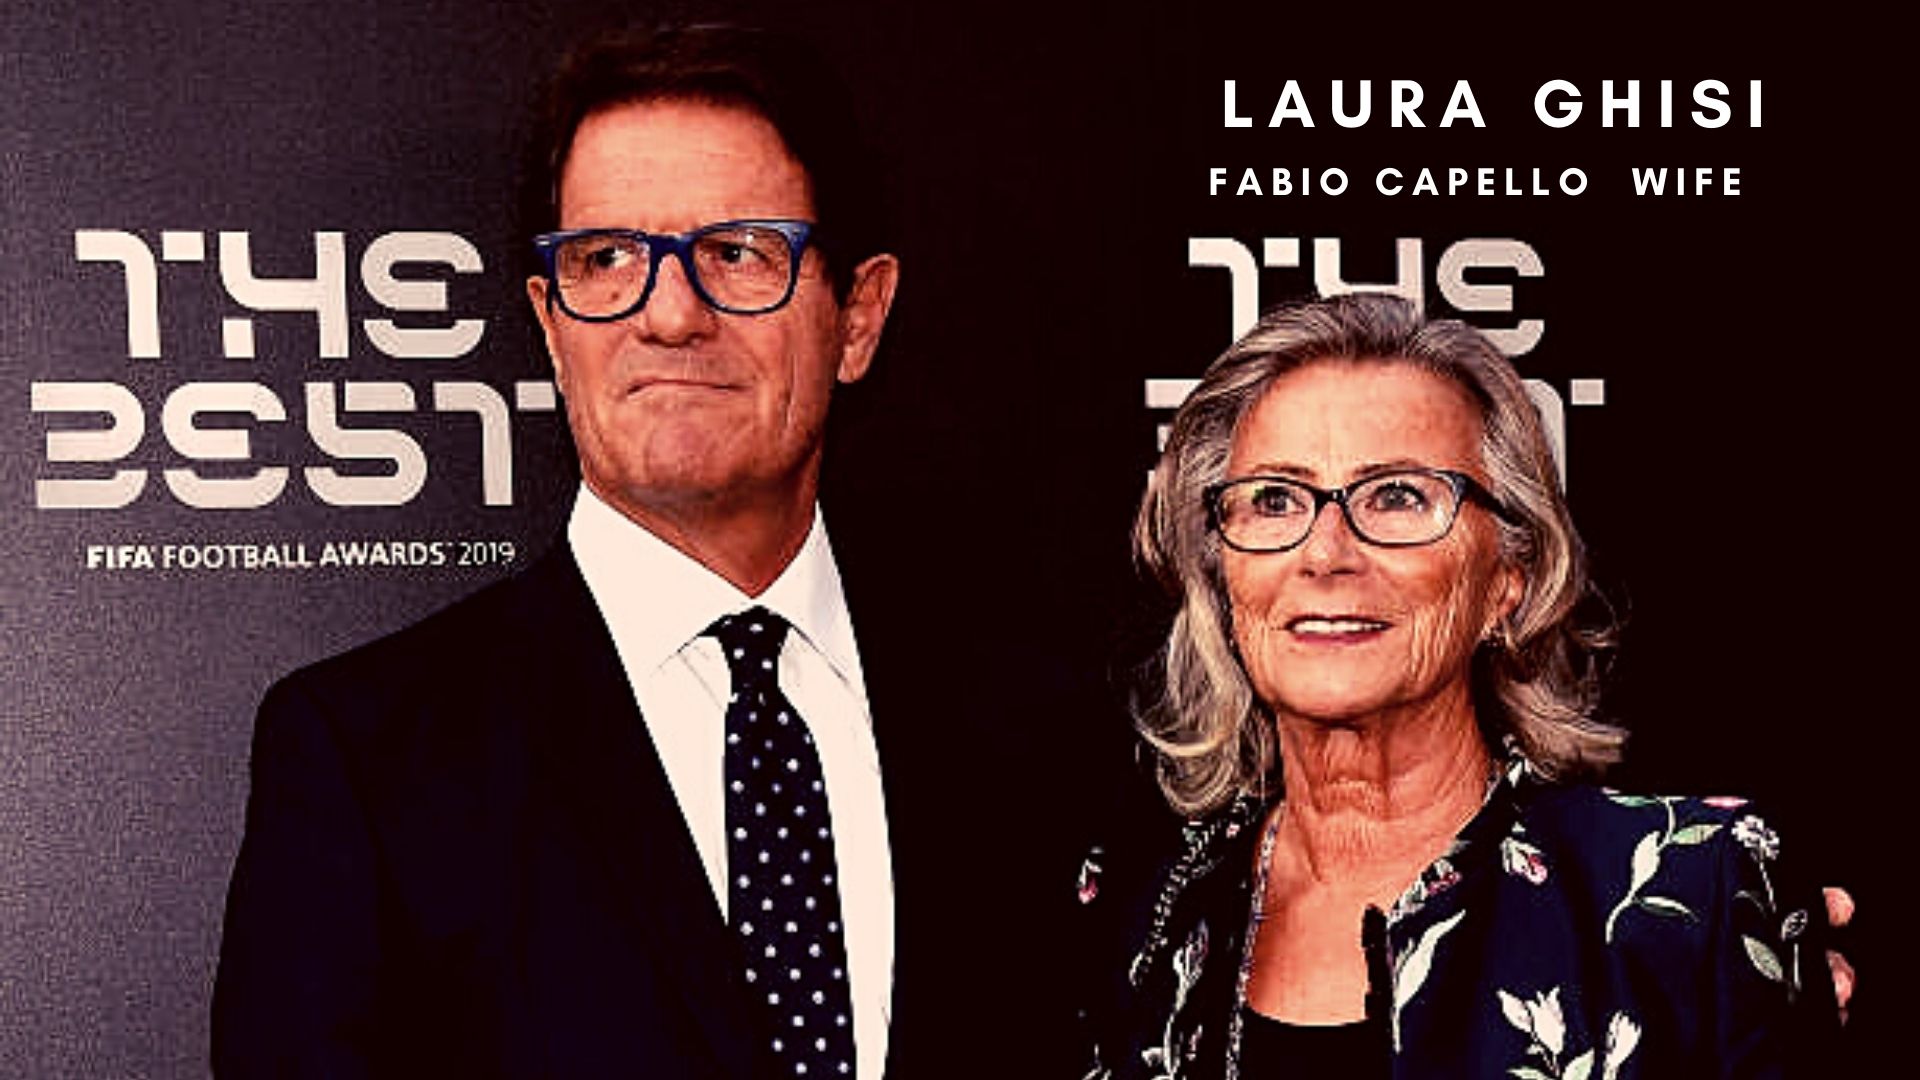 Who is Laura Ghisi? Meet the wife of Fabio Capello.